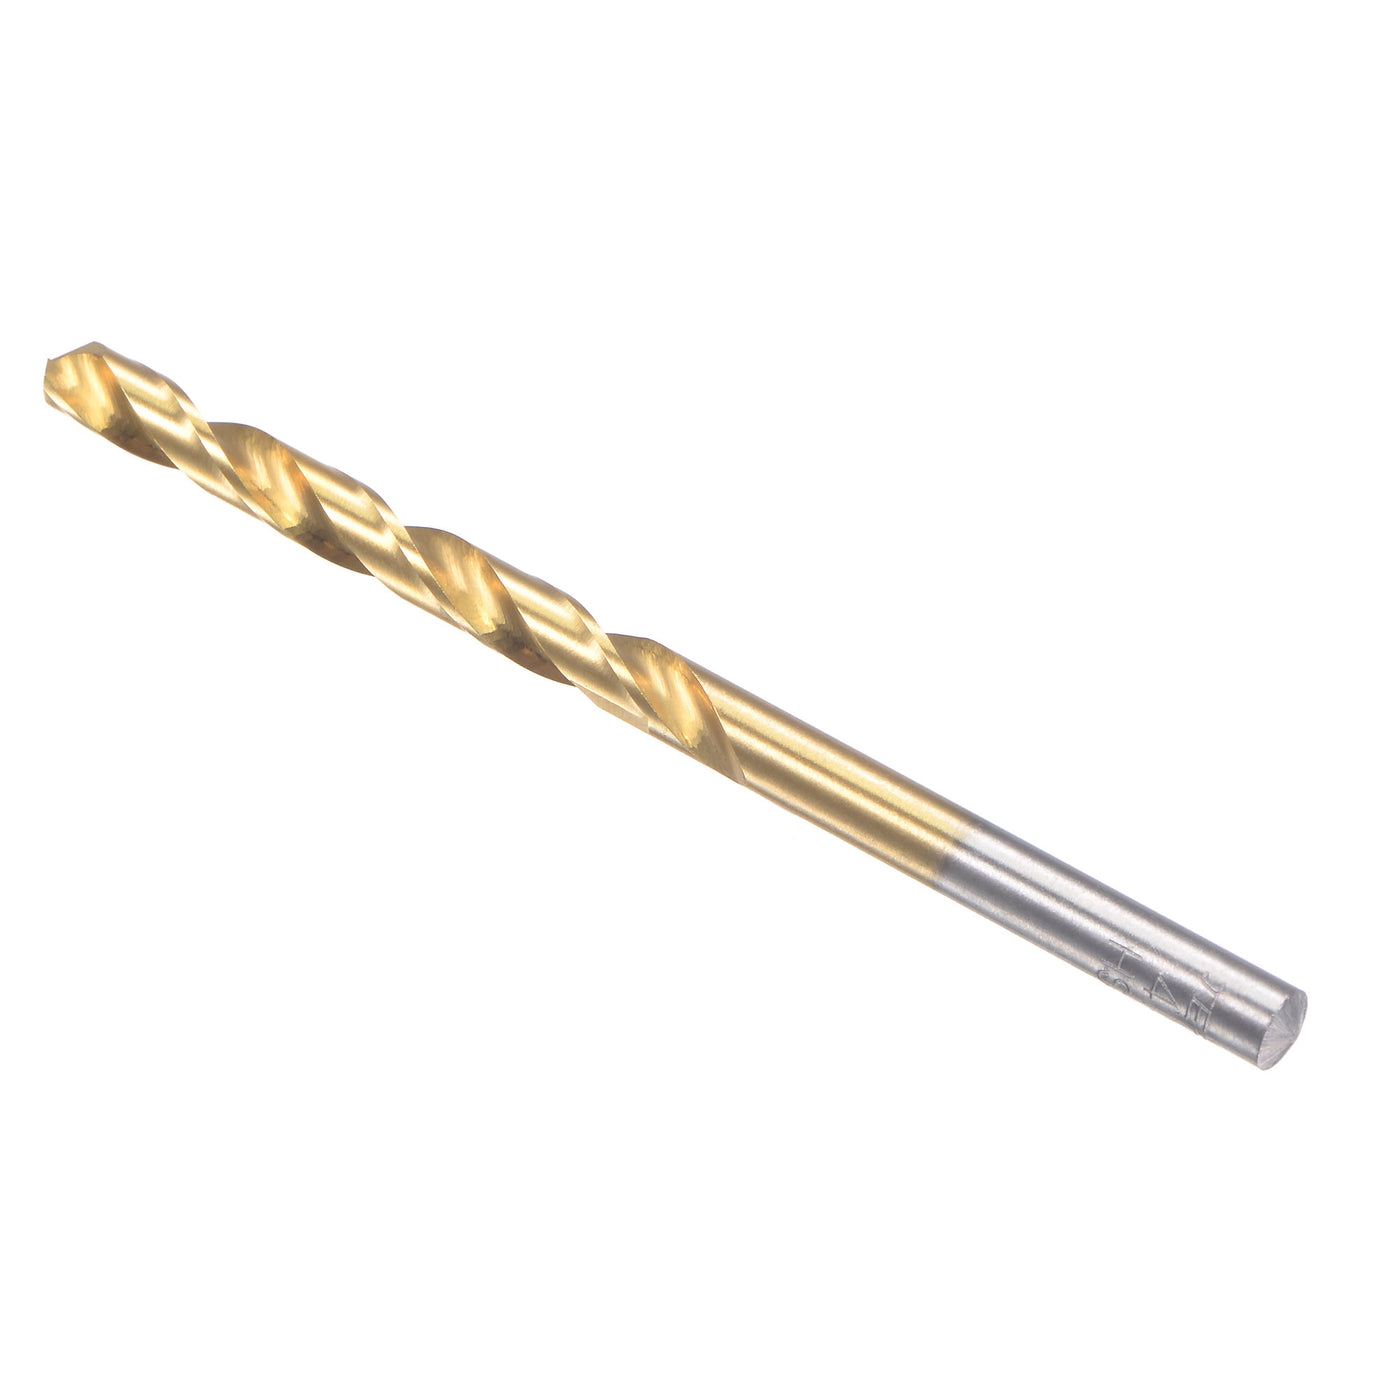 uxcell Uxcell High Speed Steel Twist Drill Bit 4.9mm Fully Ground Titanium Coated 2 Pcs